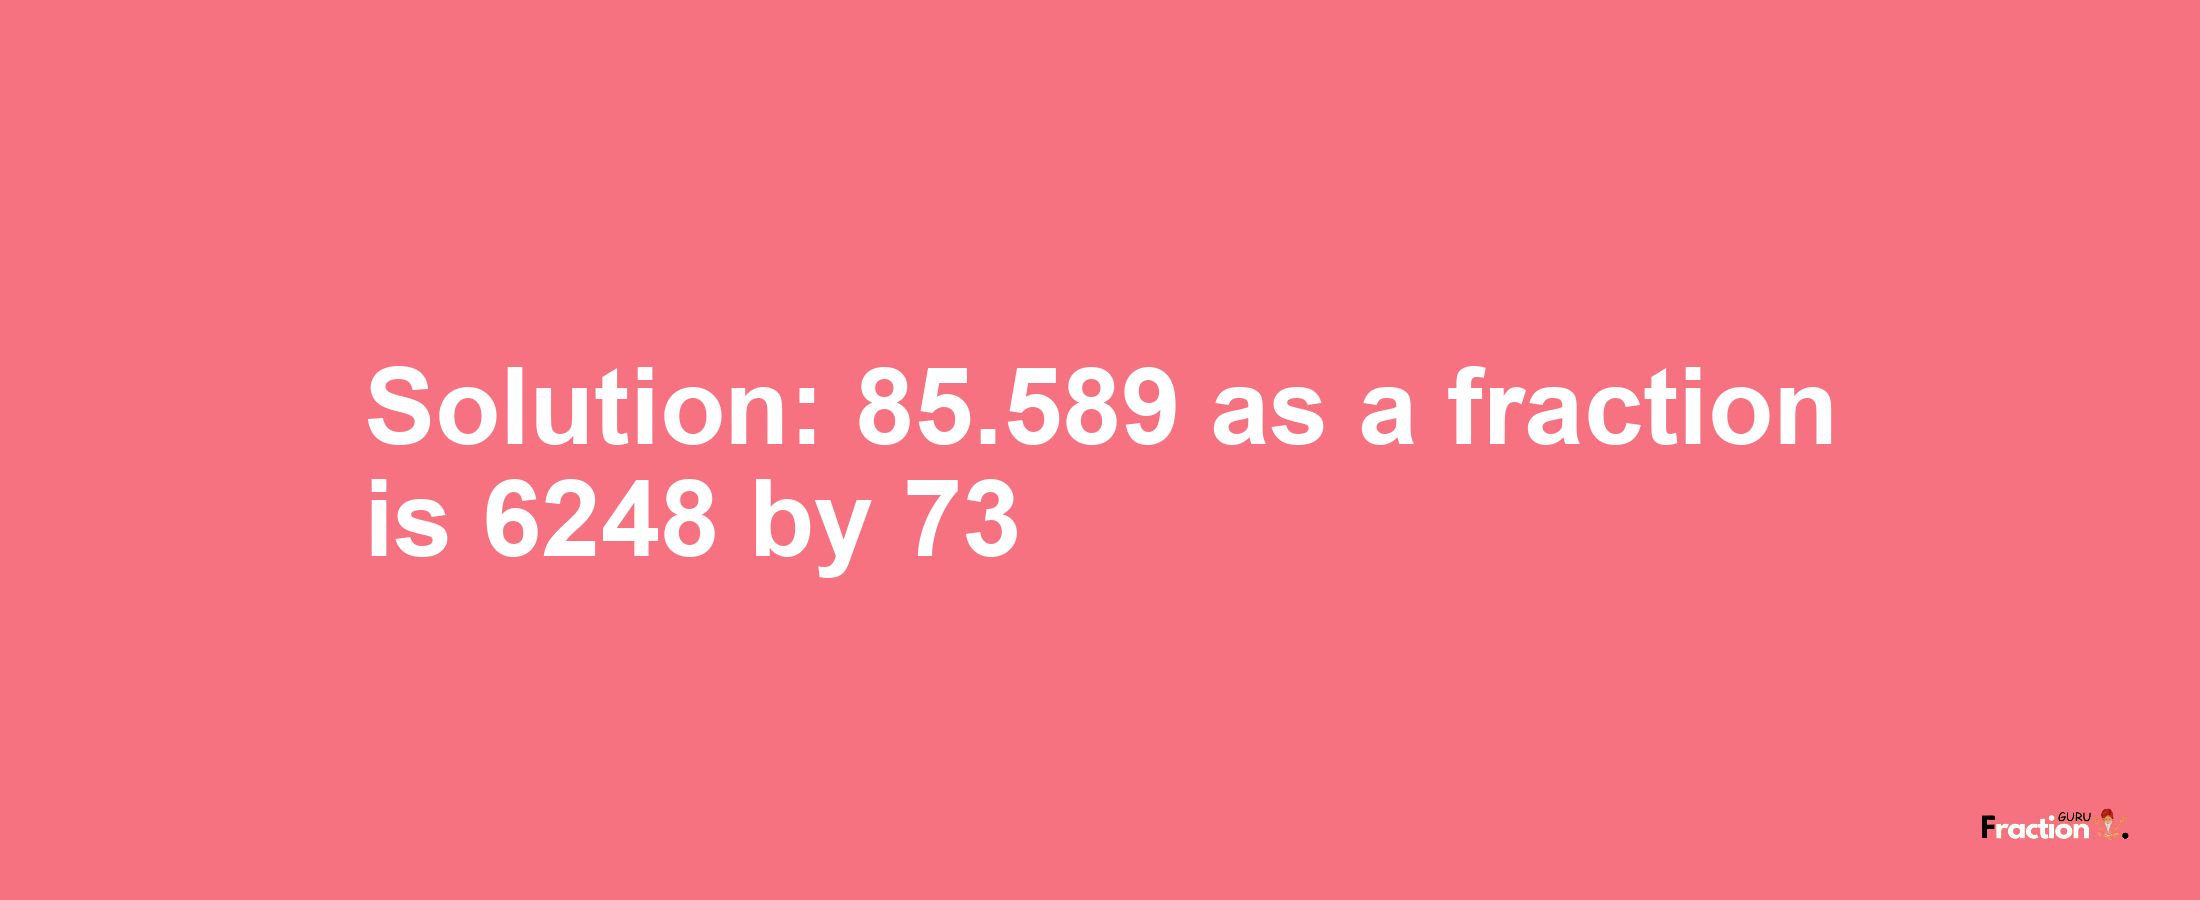 Solution:85.589 as a fraction is 6248/73